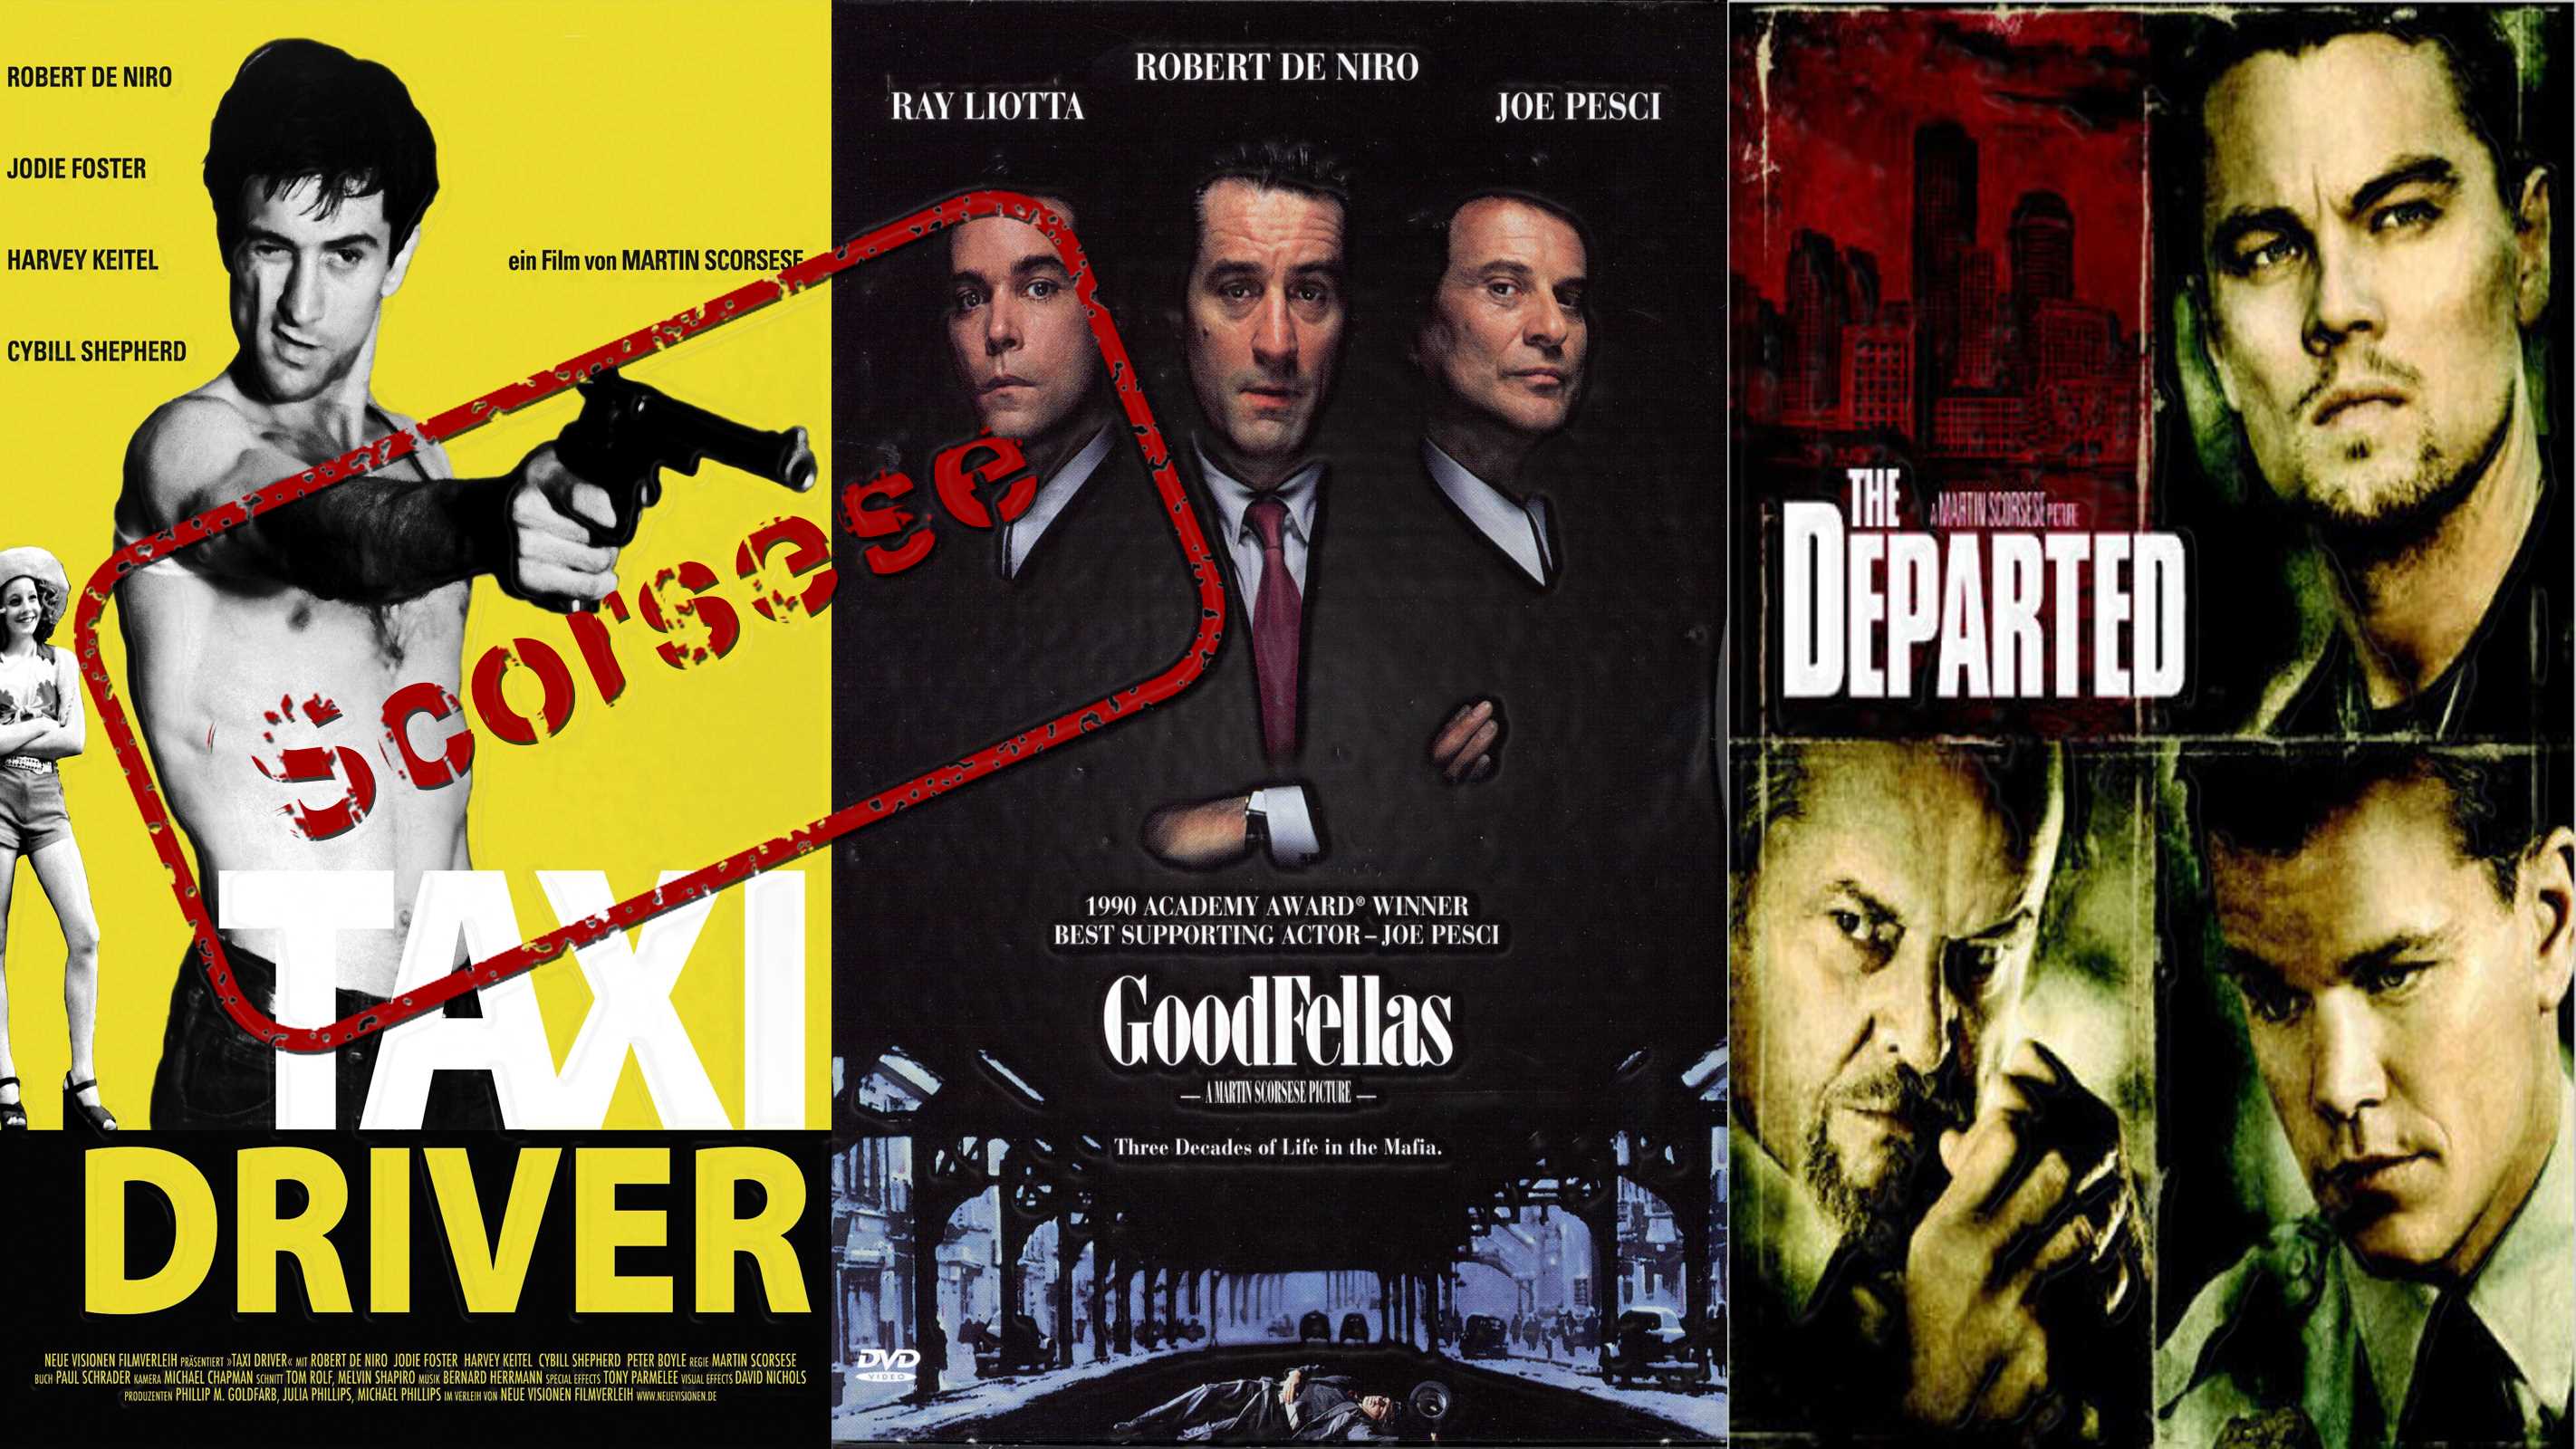 Best Scorsese movie The Departed, Goodfellas or Taxi Driver? netivist